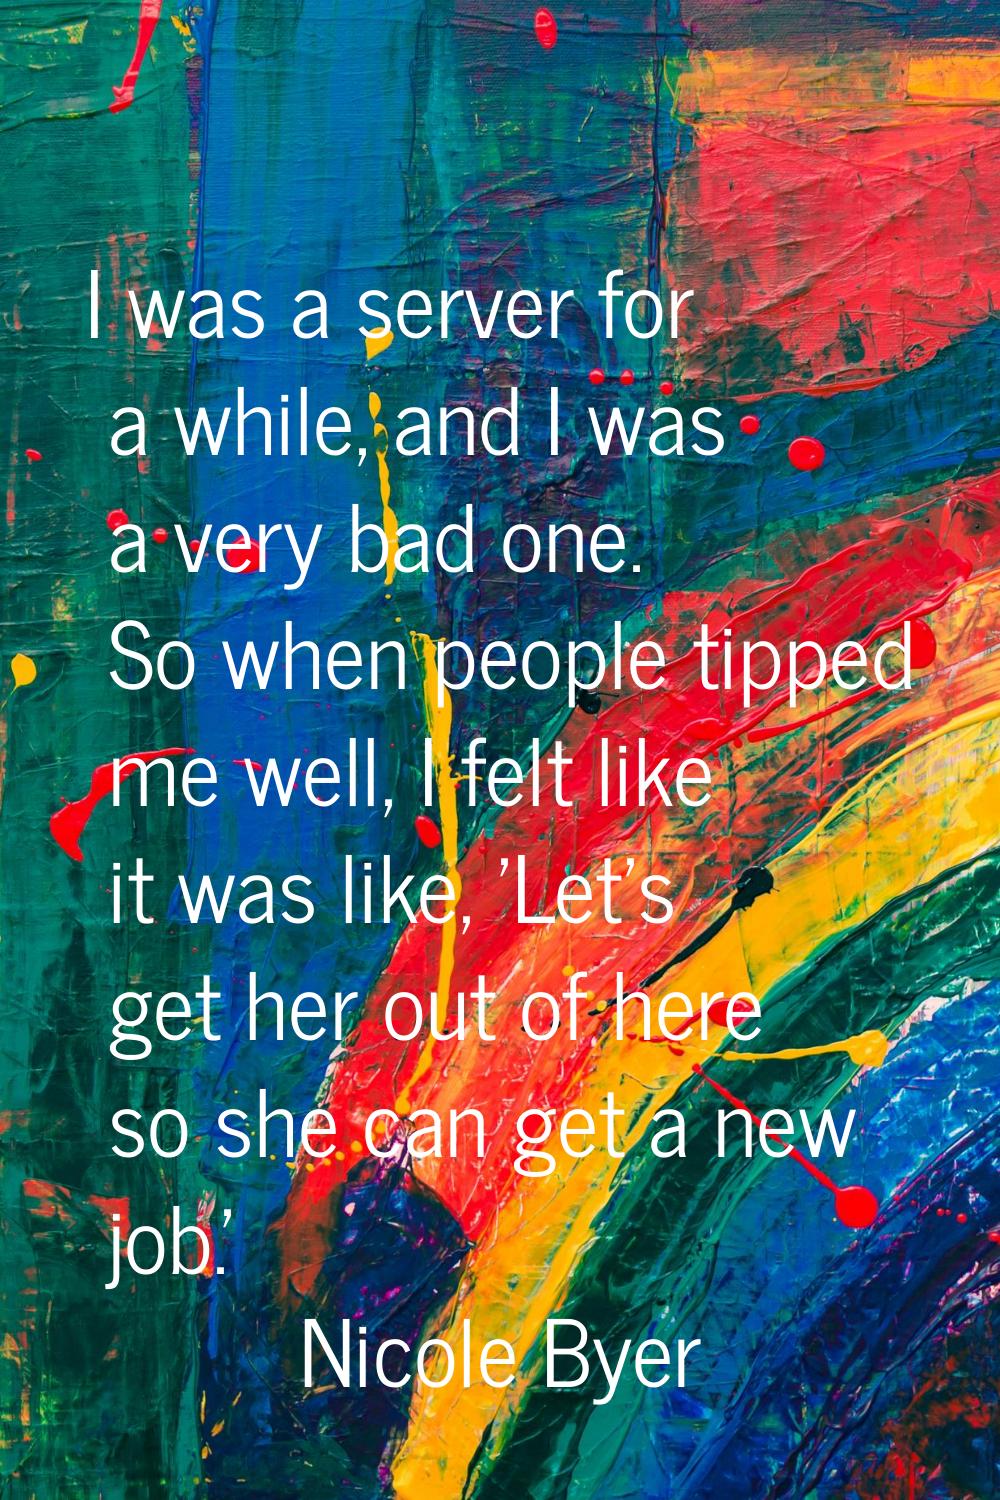 I was a server for a while, and I was a very bad one. So when people tipped me well, I felt like it